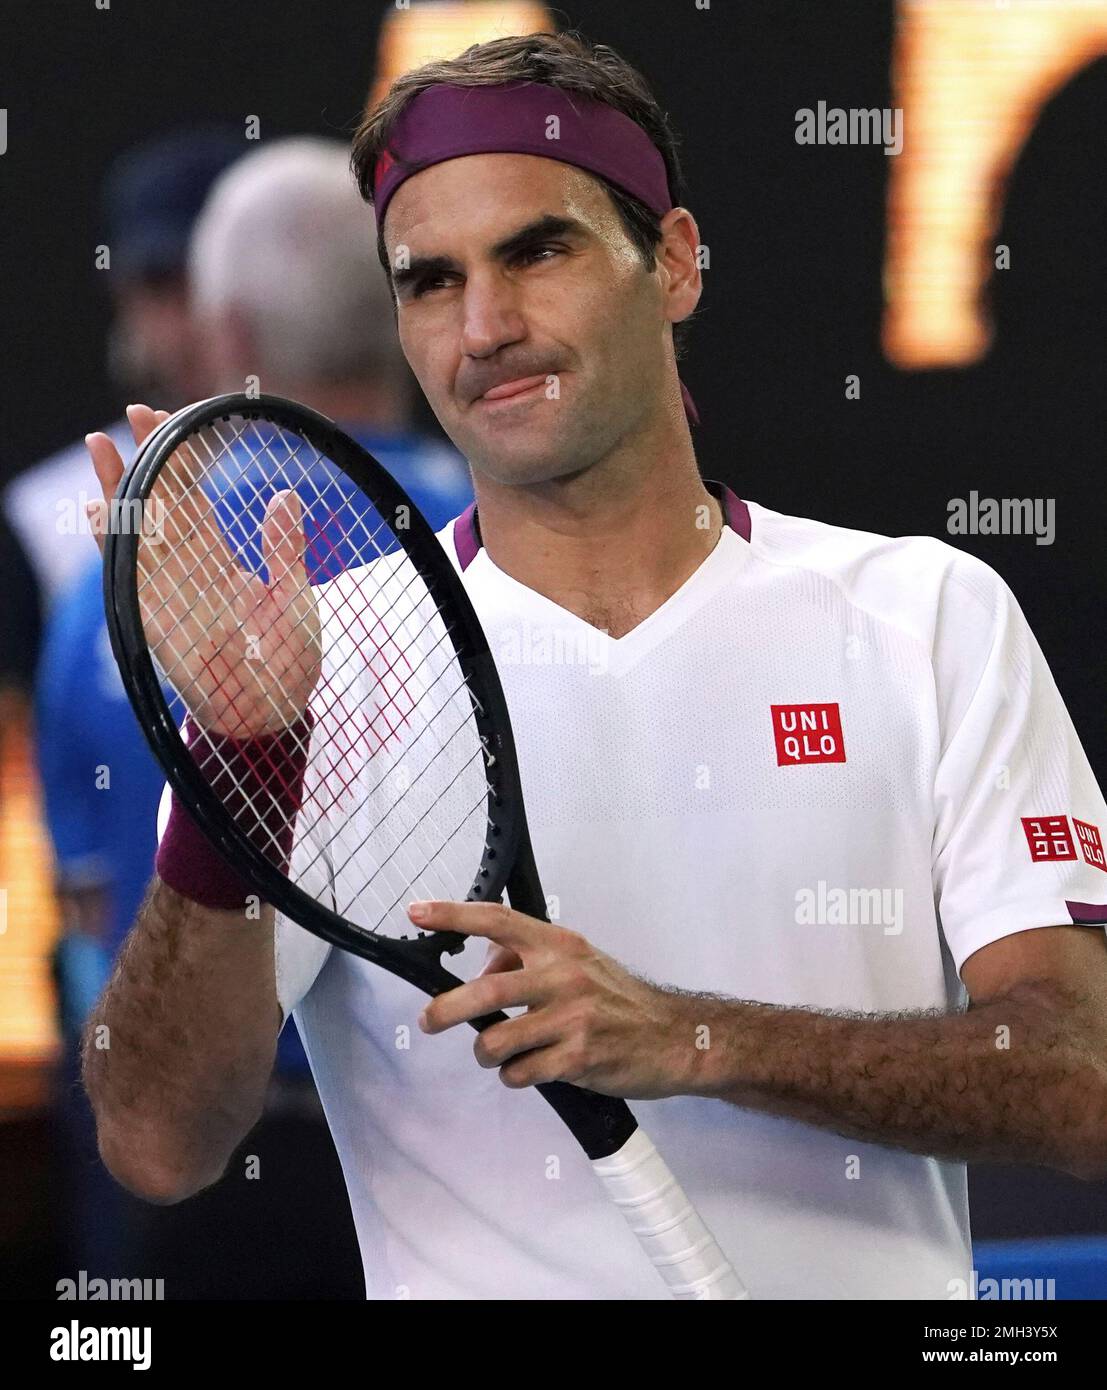 Switzerland's Roger Federer reacts after defeating Tennys Sandgren of the  U.S. in their quarterfinal match at the Australian Open tennis championship  in Melbourne, Australia, Tuesday, Jan. 28, 2020. (AP Photo/Lee Jin-man Stock